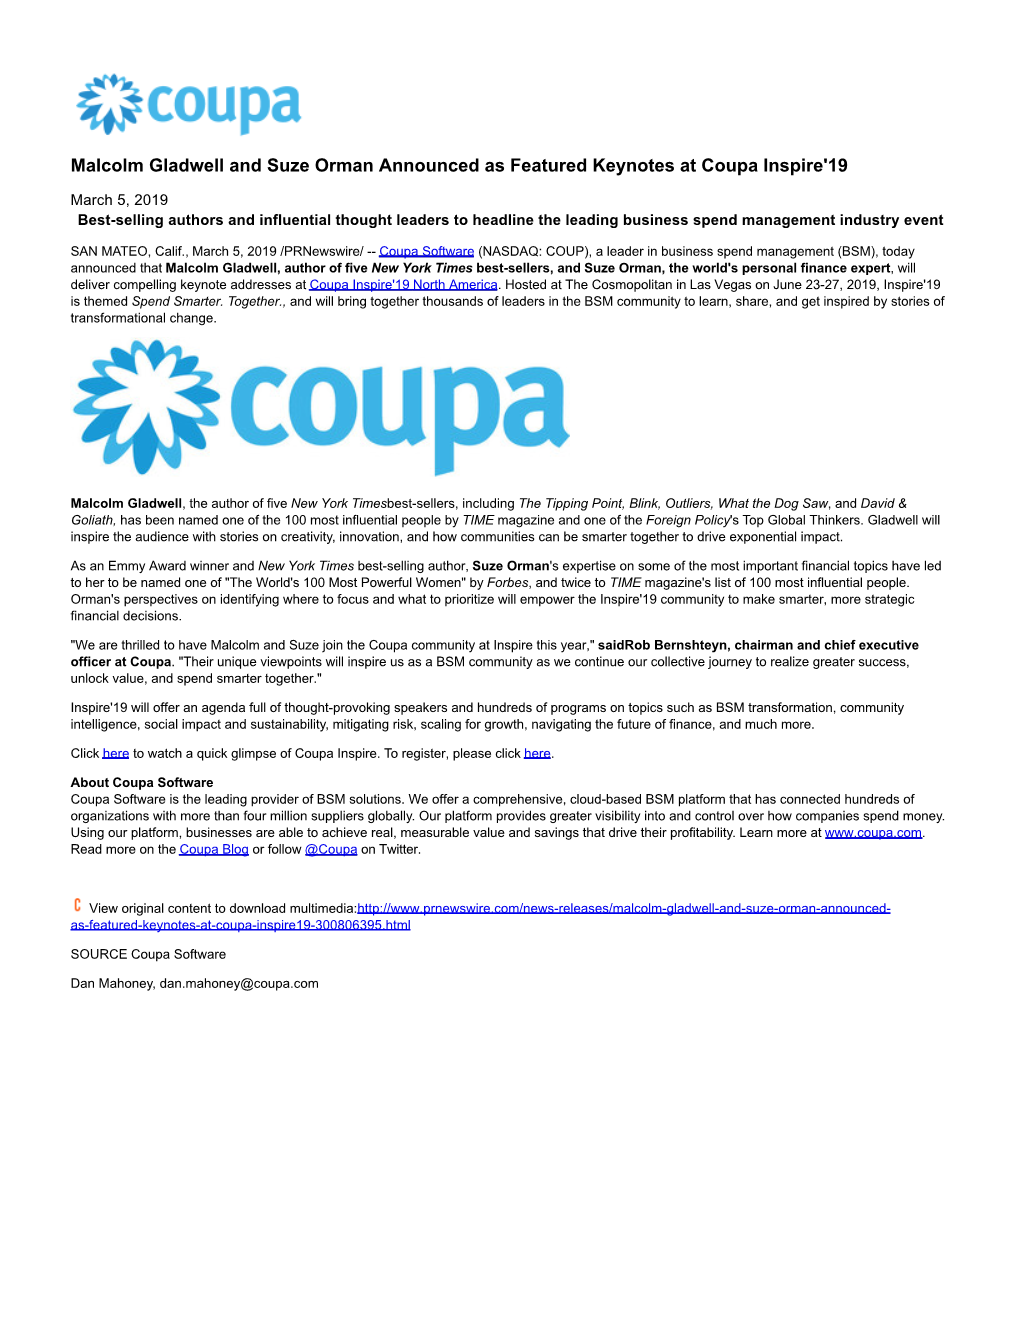 Malcolm Gladwell and Suze Orman Announced As Featured Keynotes at Coupa Inspire'19